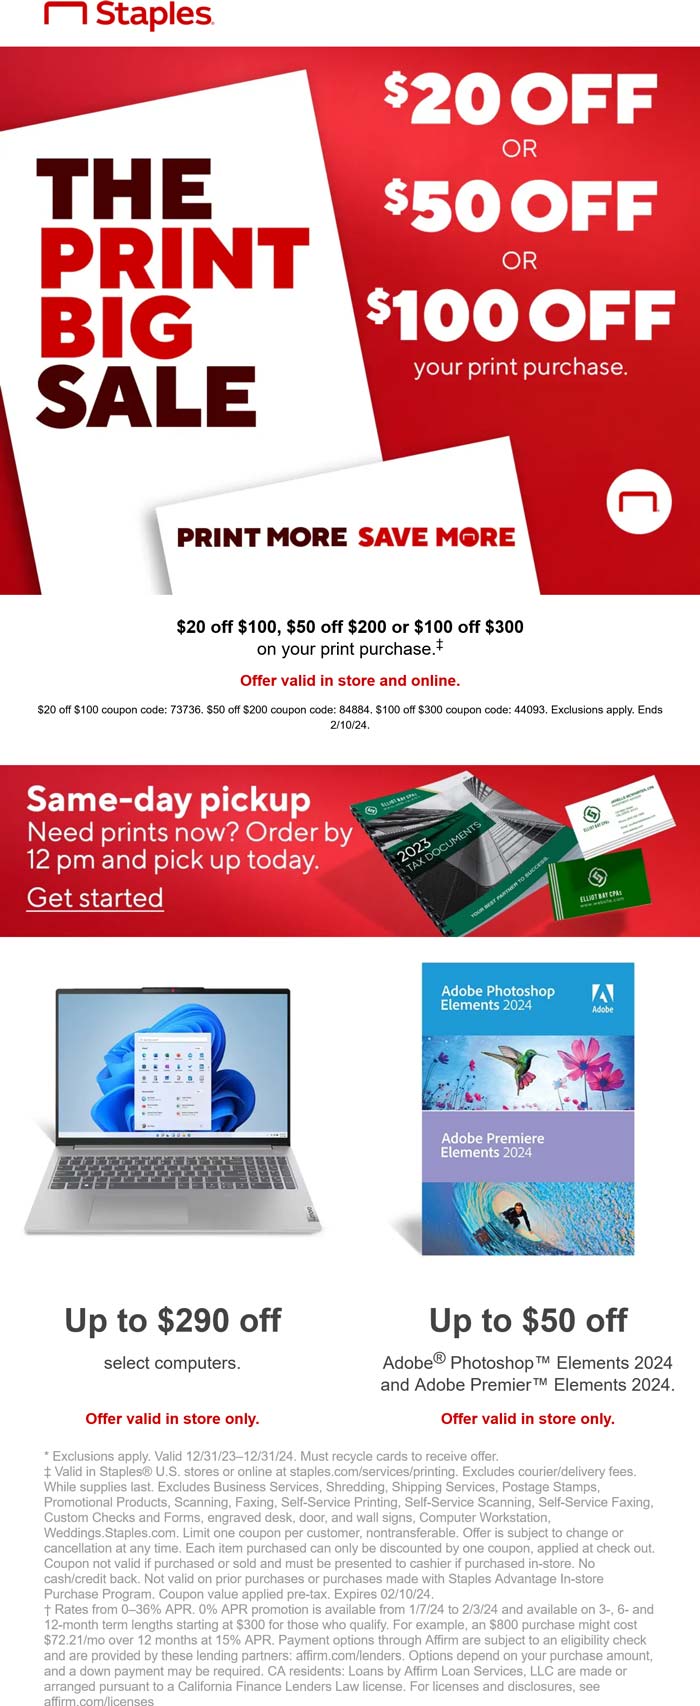 Staples stores Coupon  $20-$100 off $100+ on printing at Staples via promo code 73736 84884 or 44093 #staples 